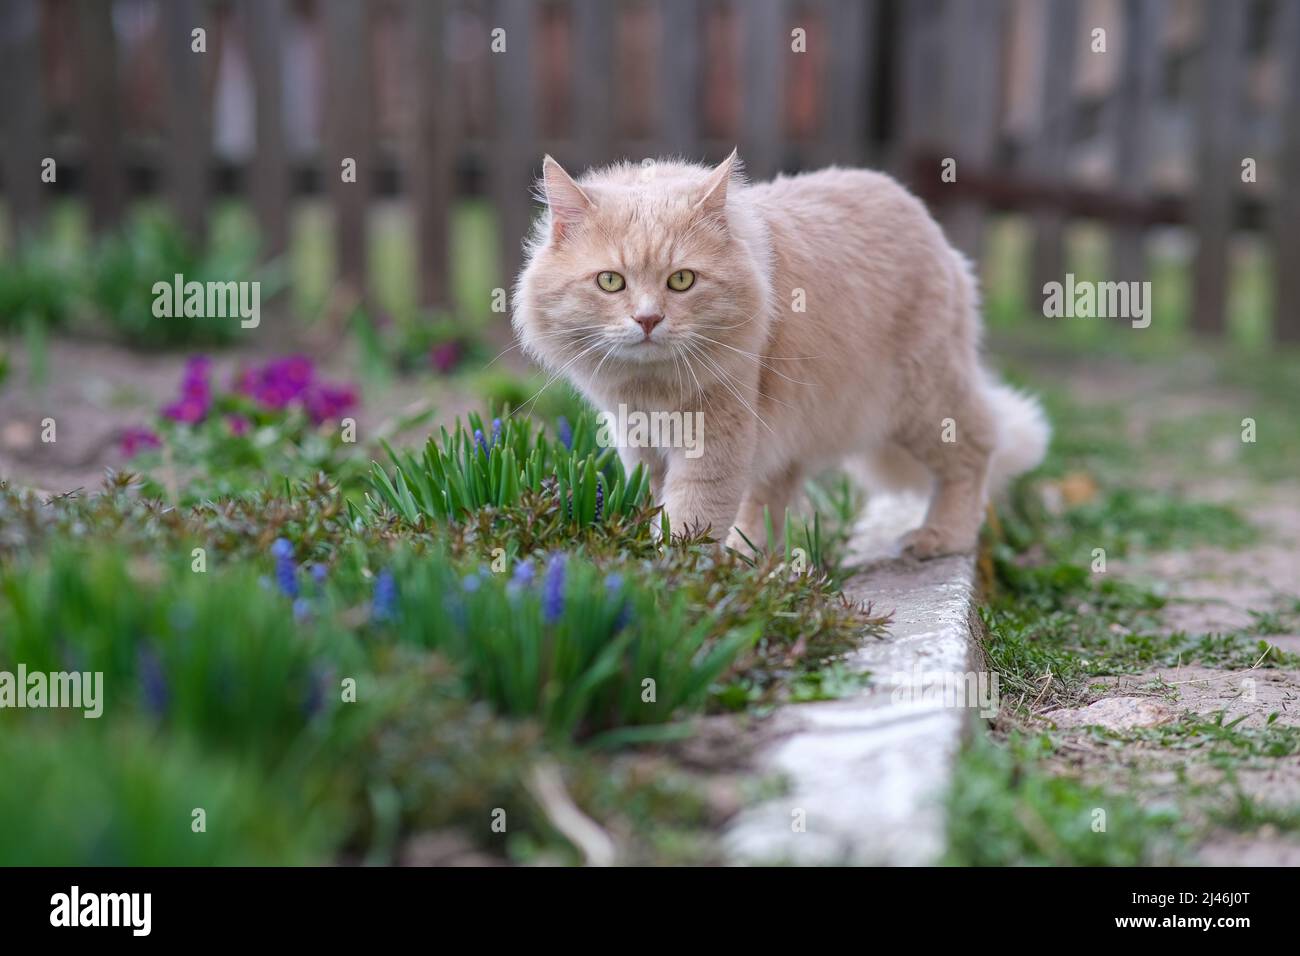 Light red fluffy cat walks in a flower bed. Stock Photo